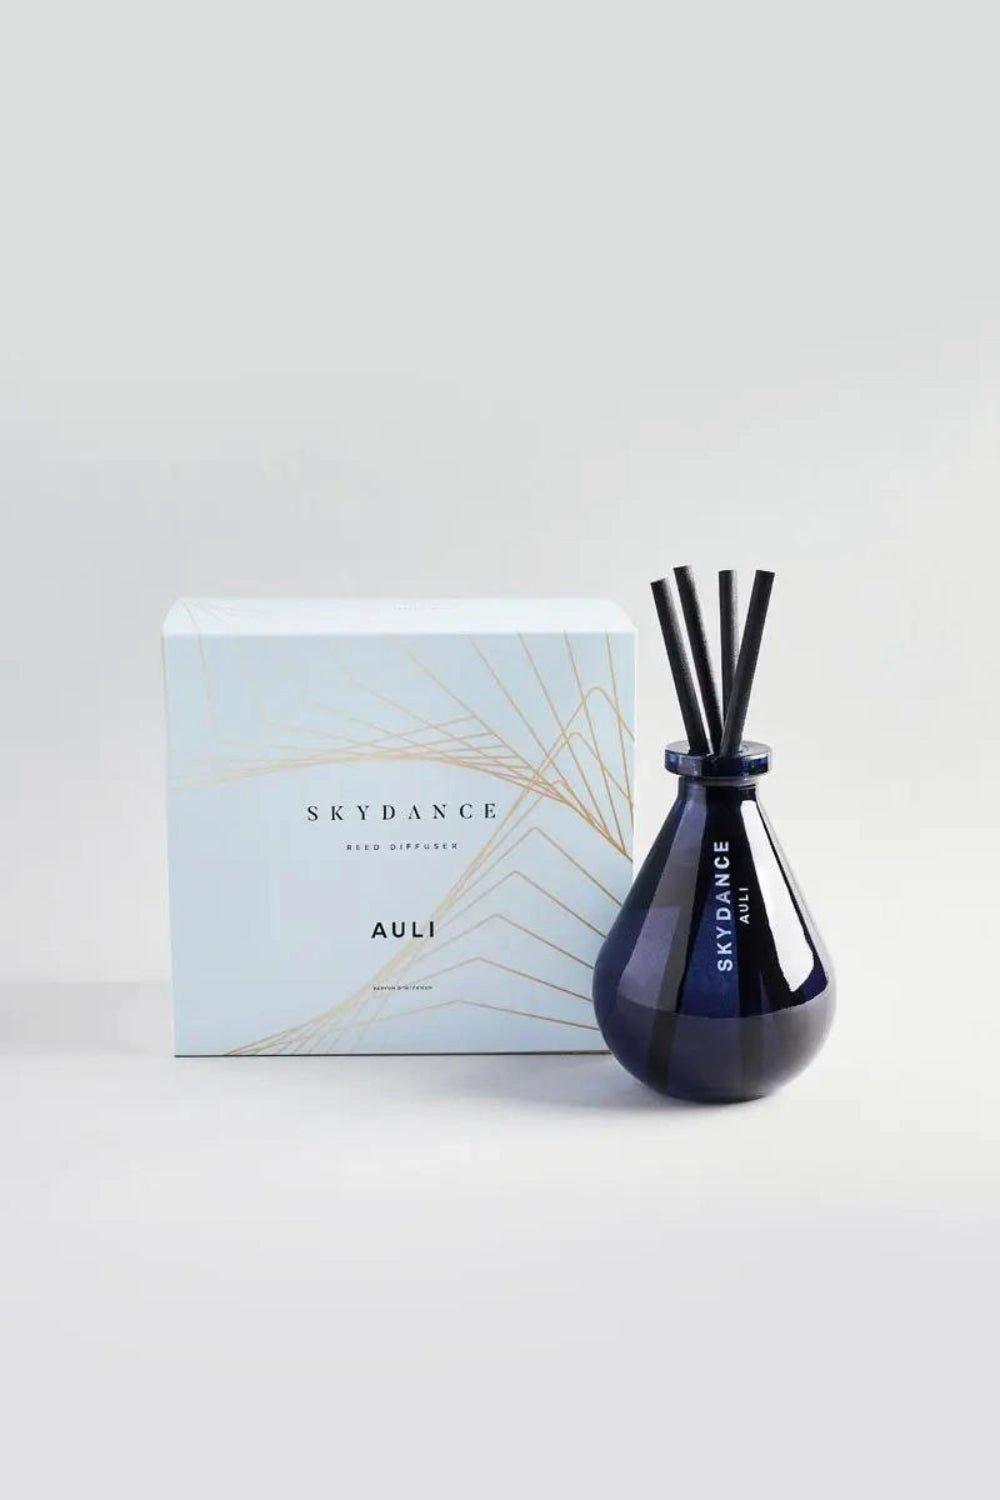 Skydance Reed Diffuser